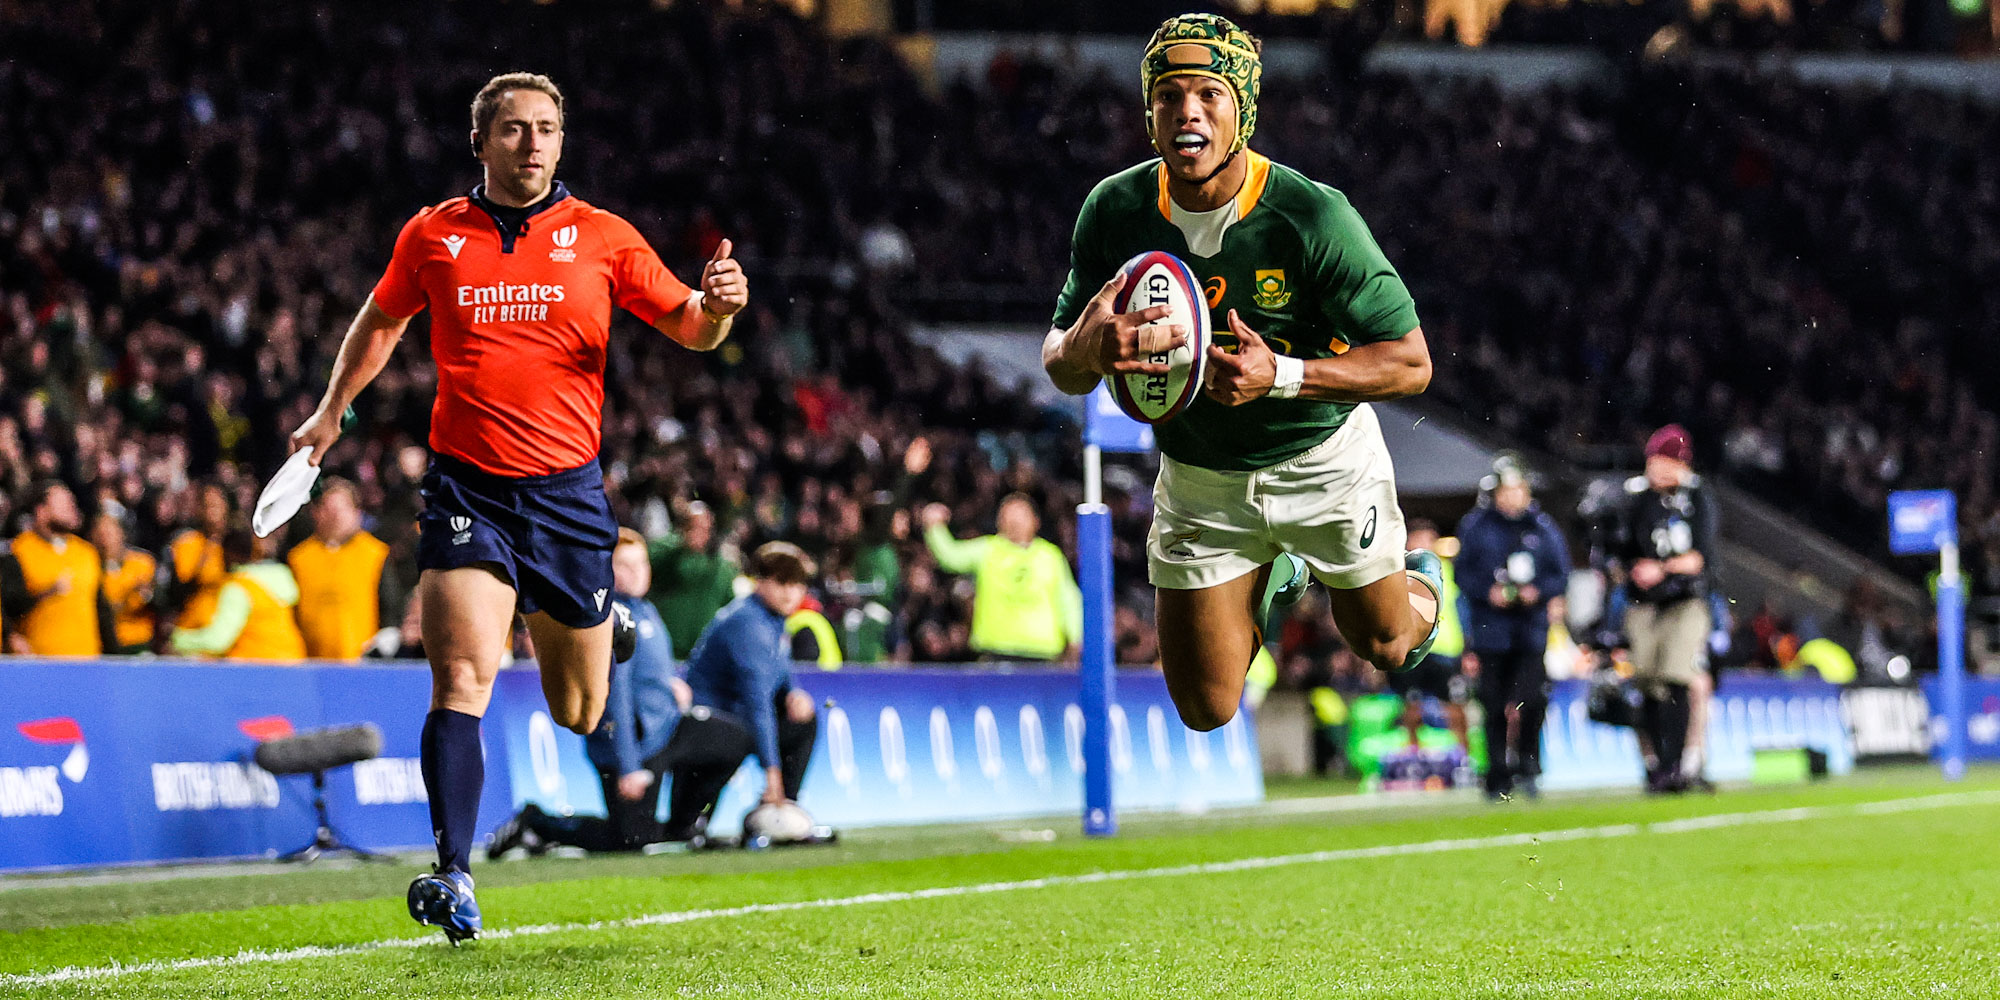 Kurt-Lee Arendse scores the last time the Boks faced England, in November 2022.